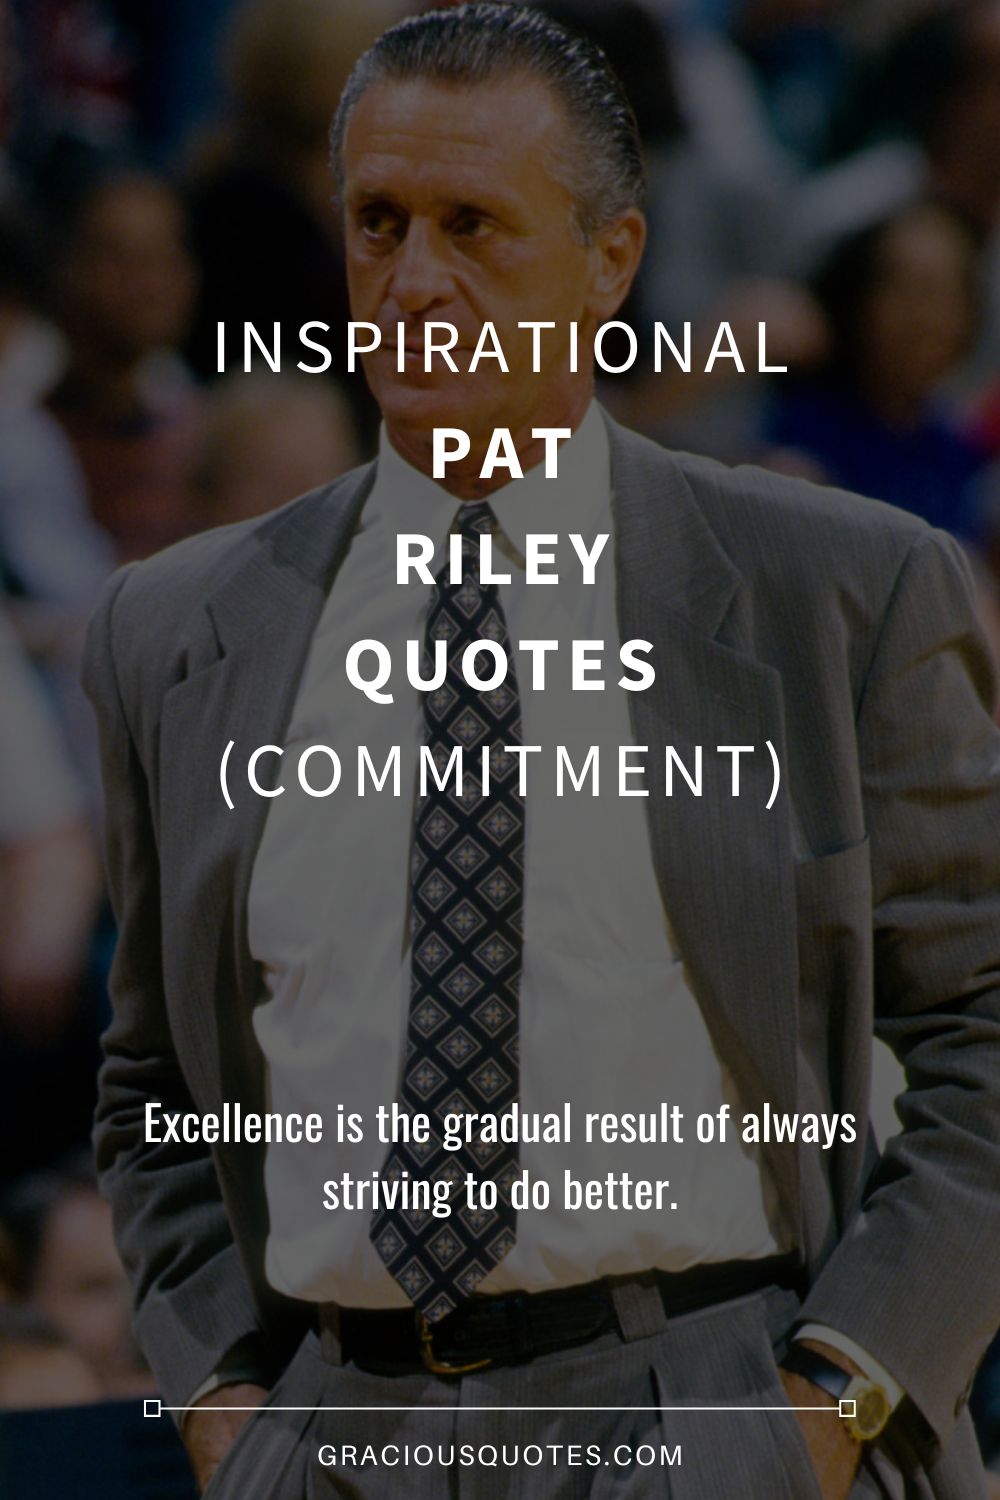 48 Inspirational Pat Riley Quotes (COMMITMENT)